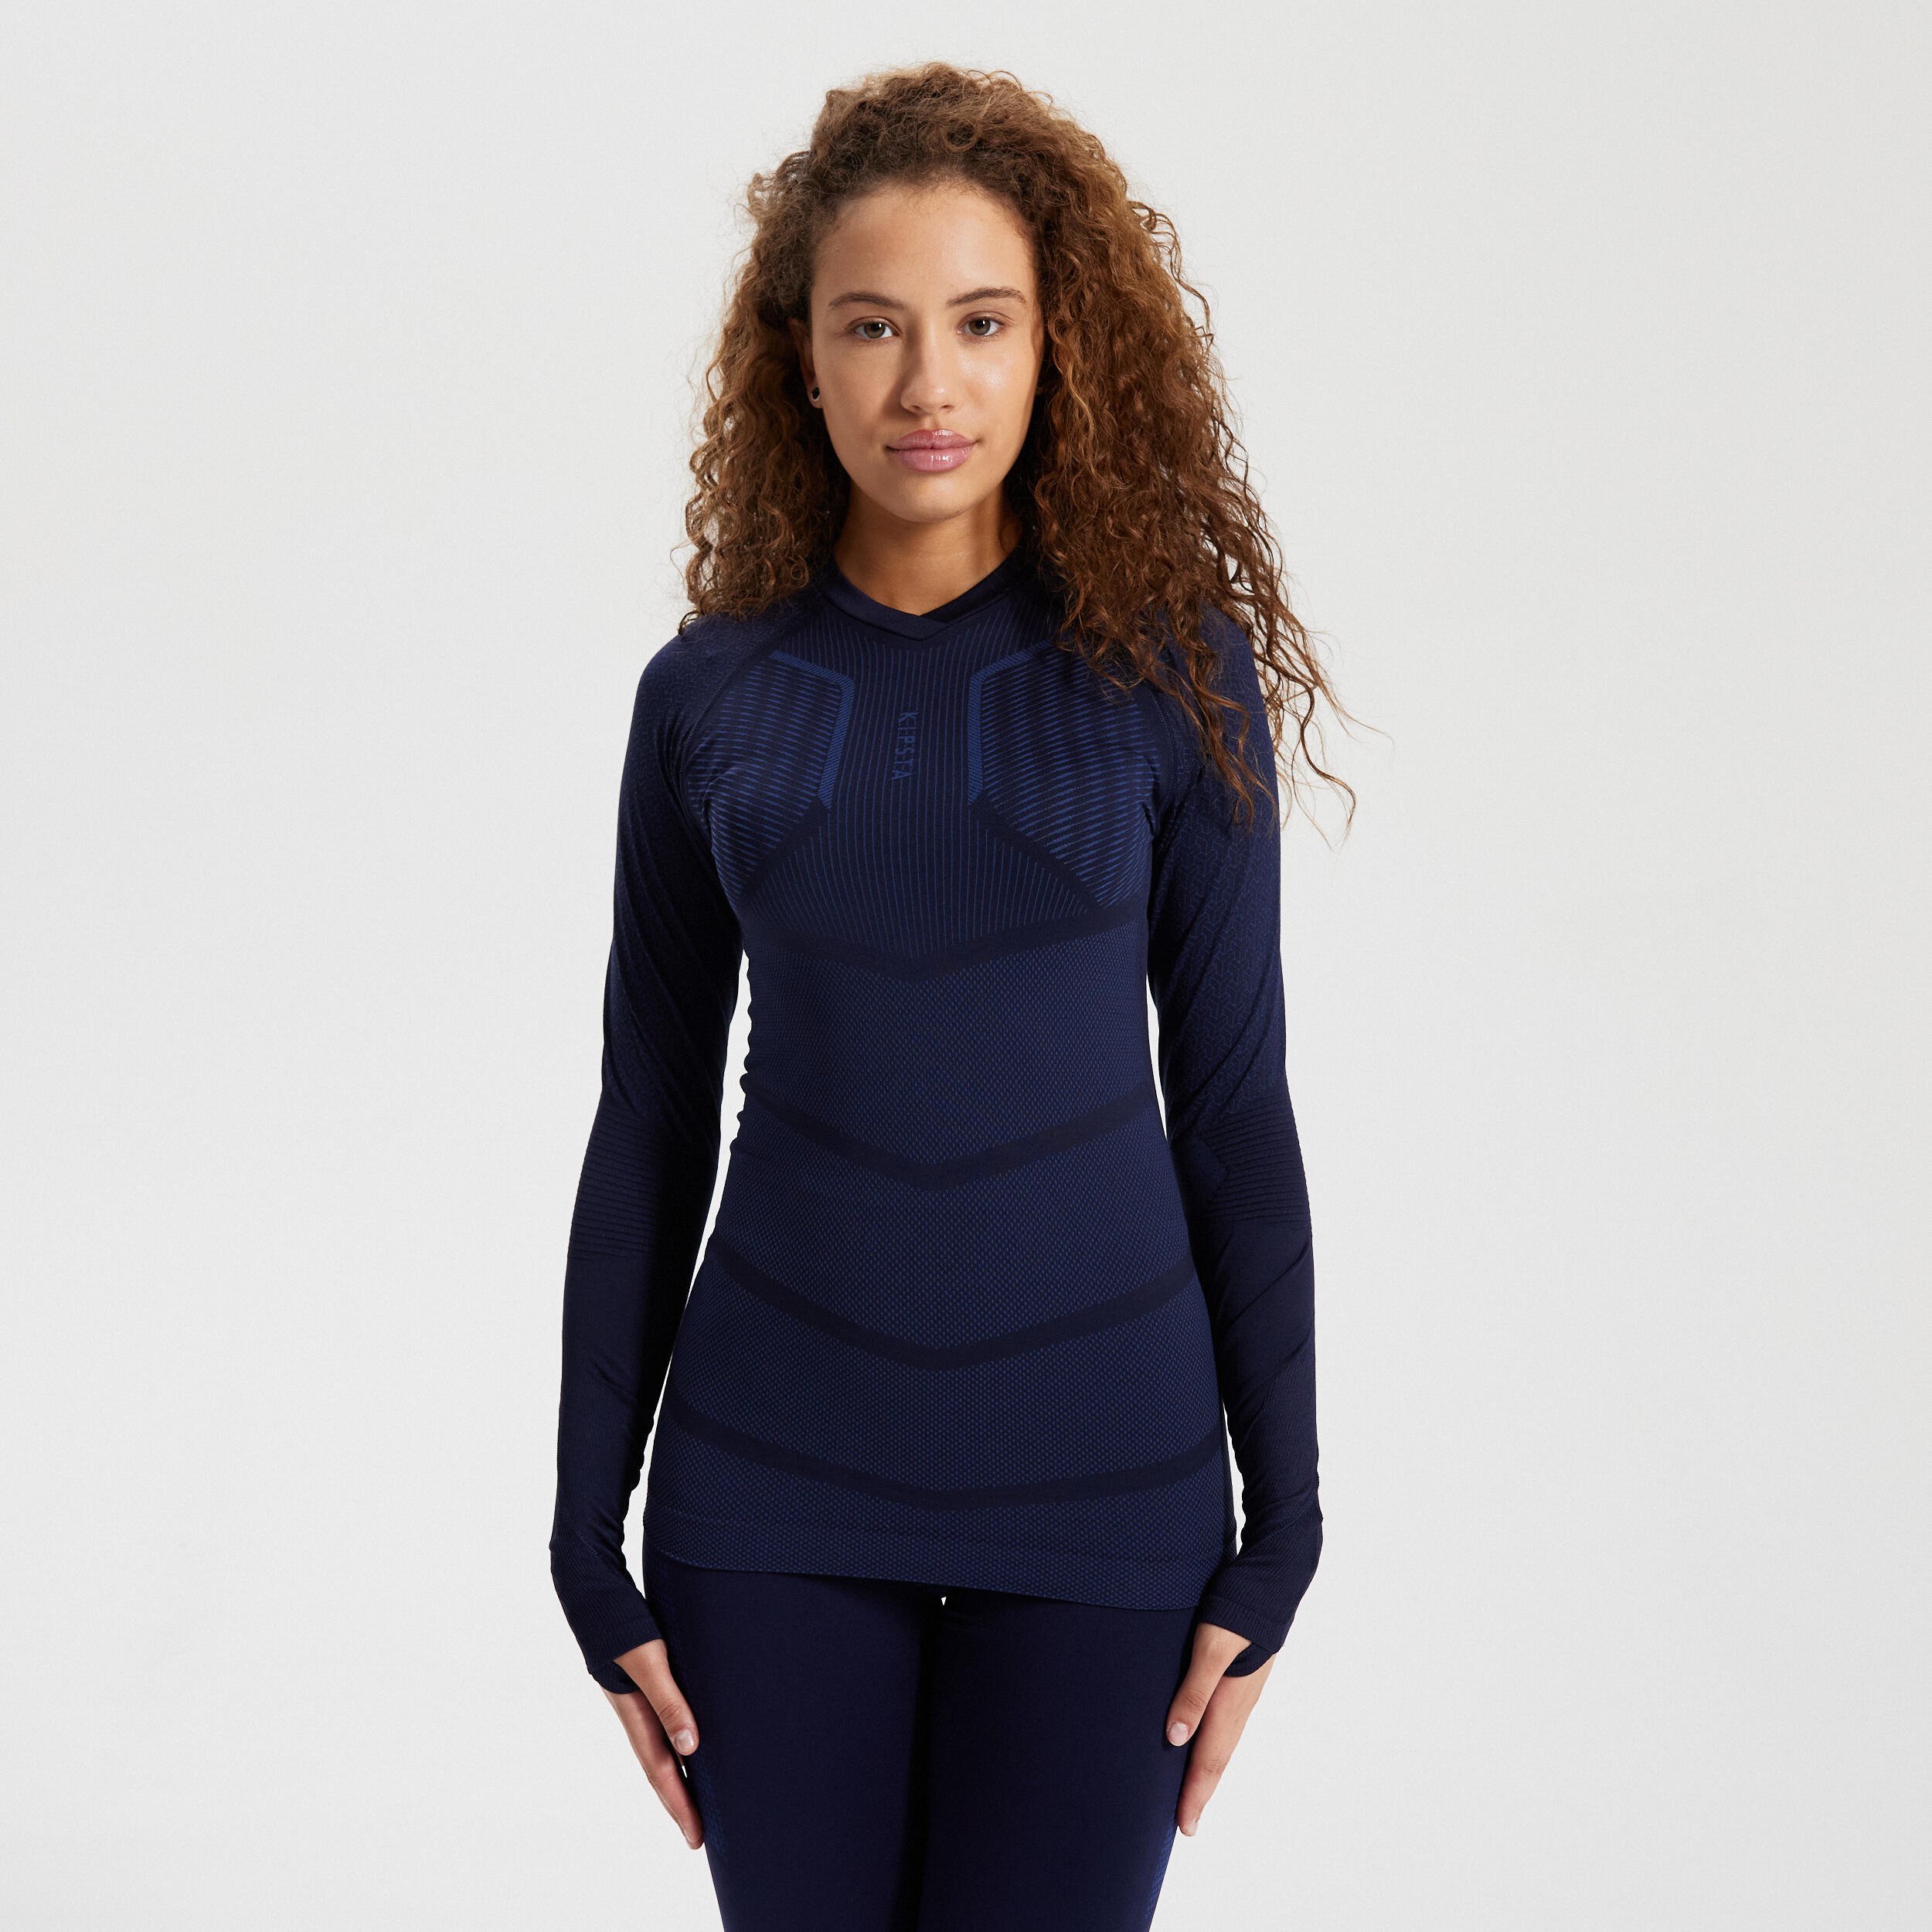 Adult Long-Sleeved Thermal Base Layer Top Keepdry 500 - Navy Blue 4/14